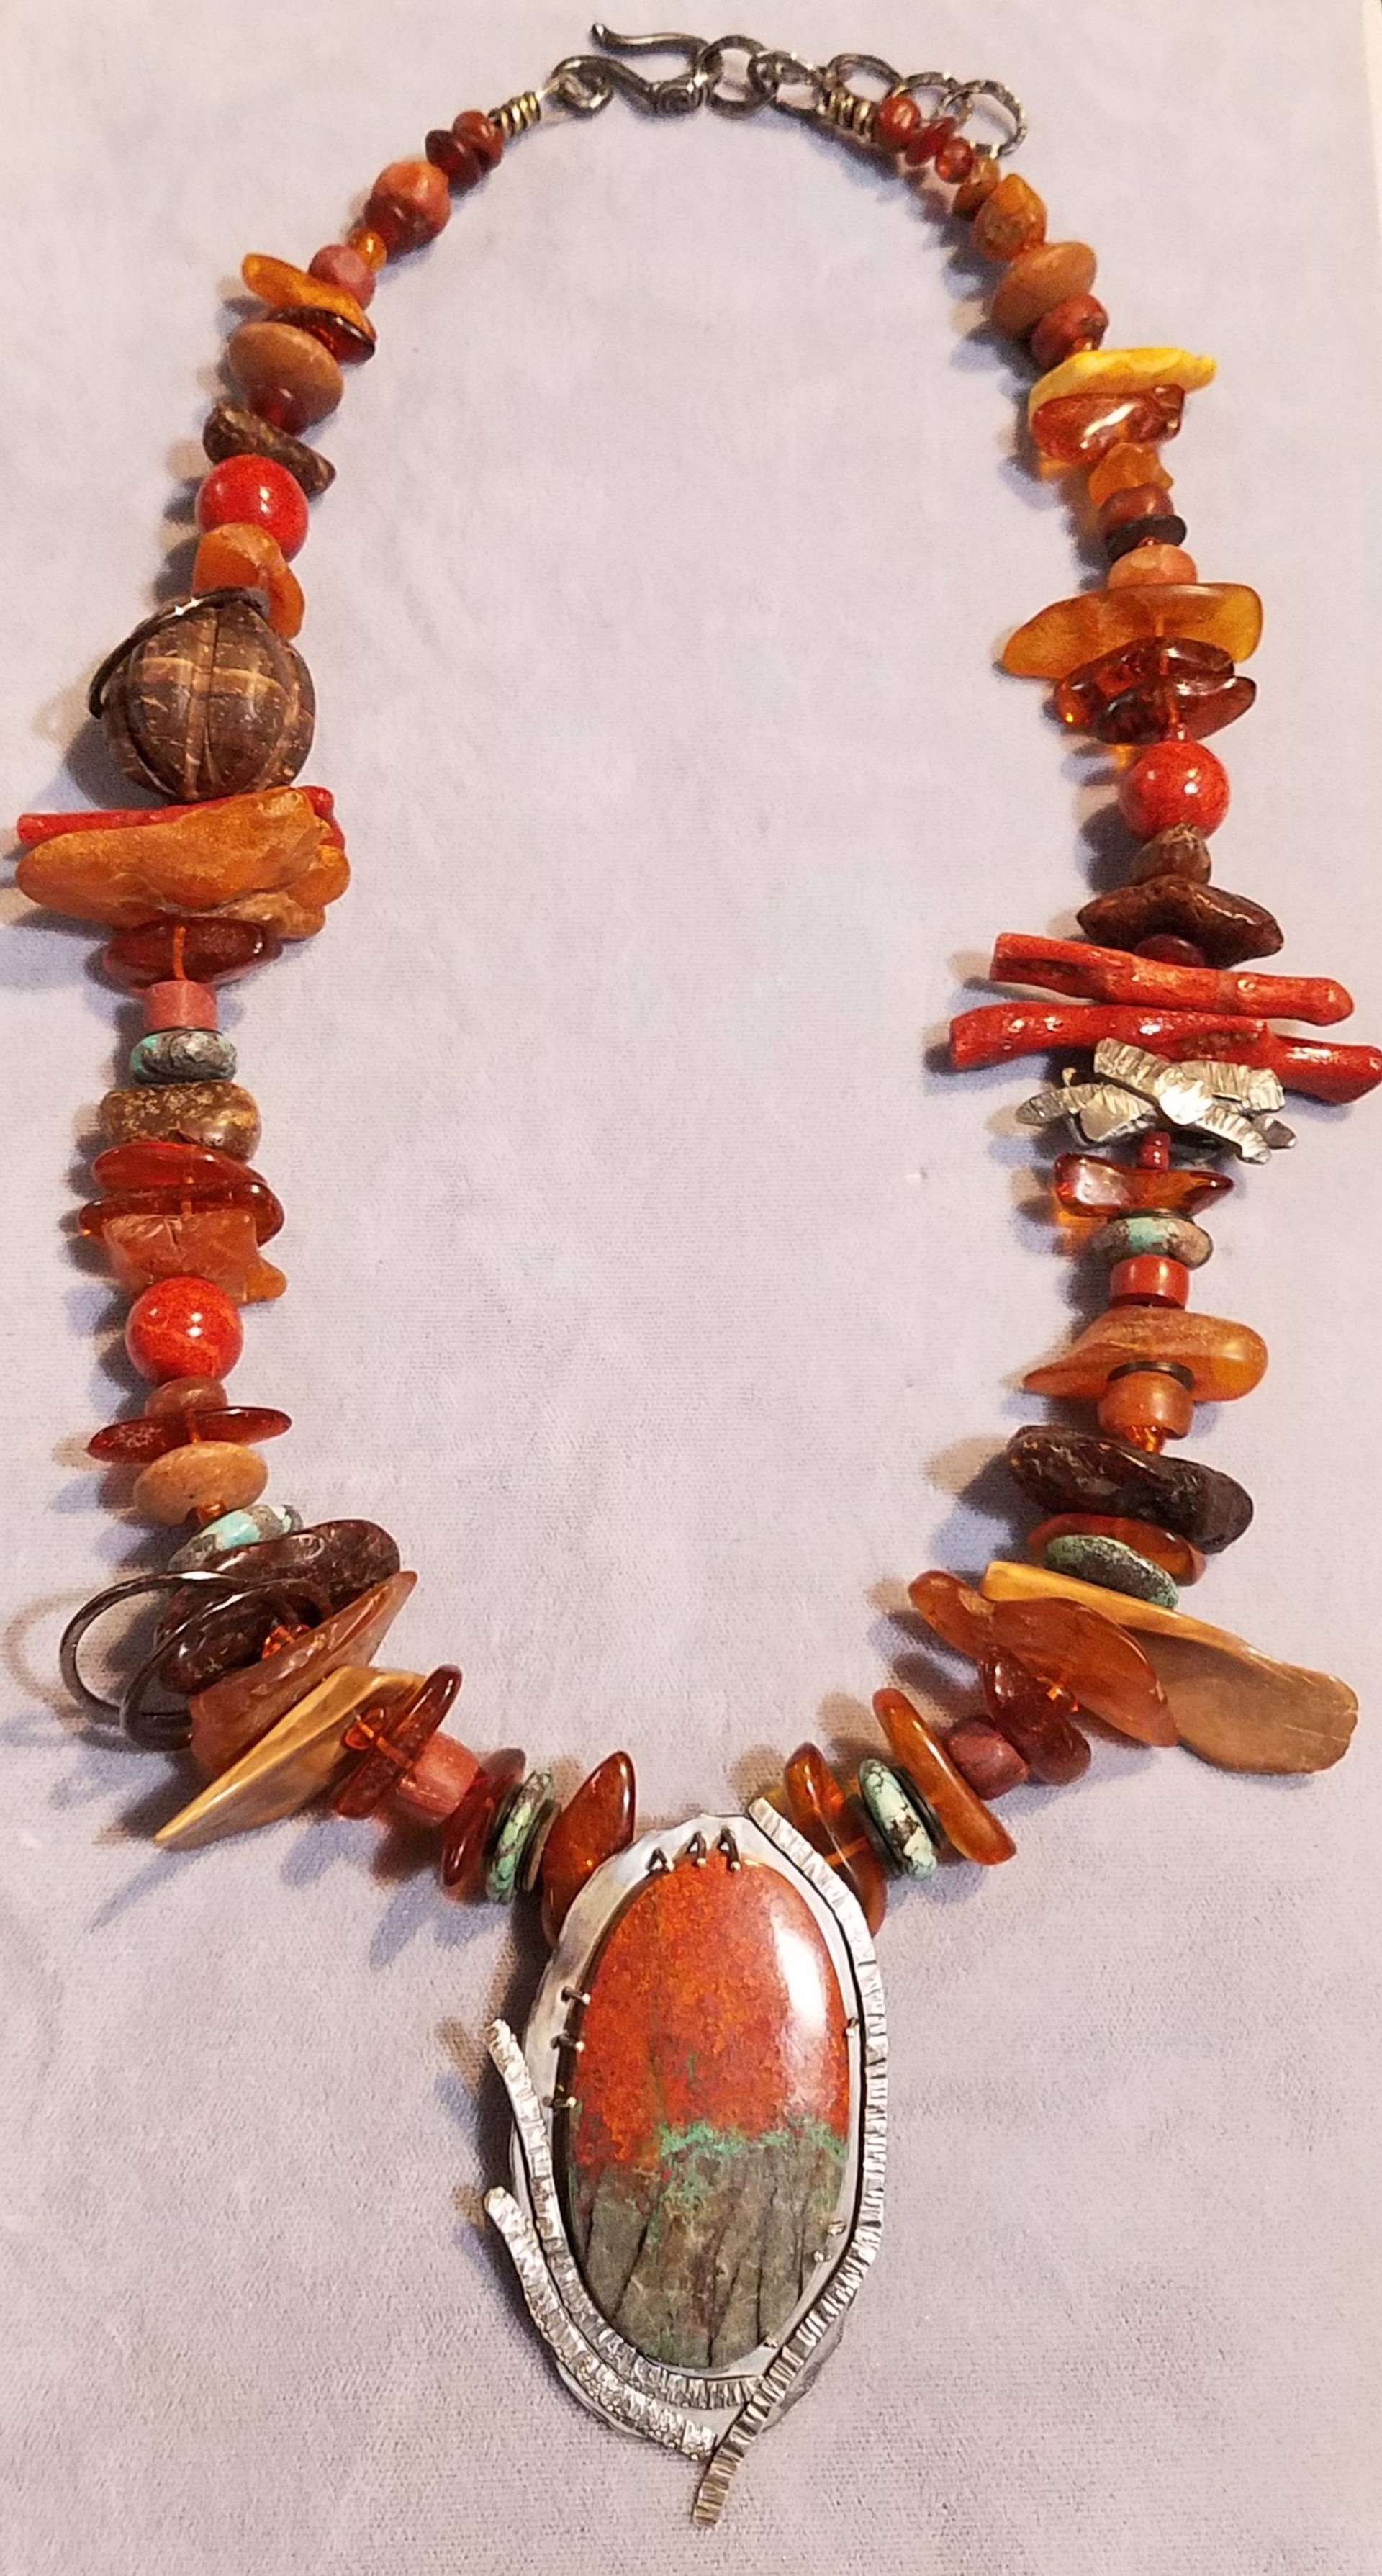 Necklace - Sonoran Sunset DK 2903 by Doris King